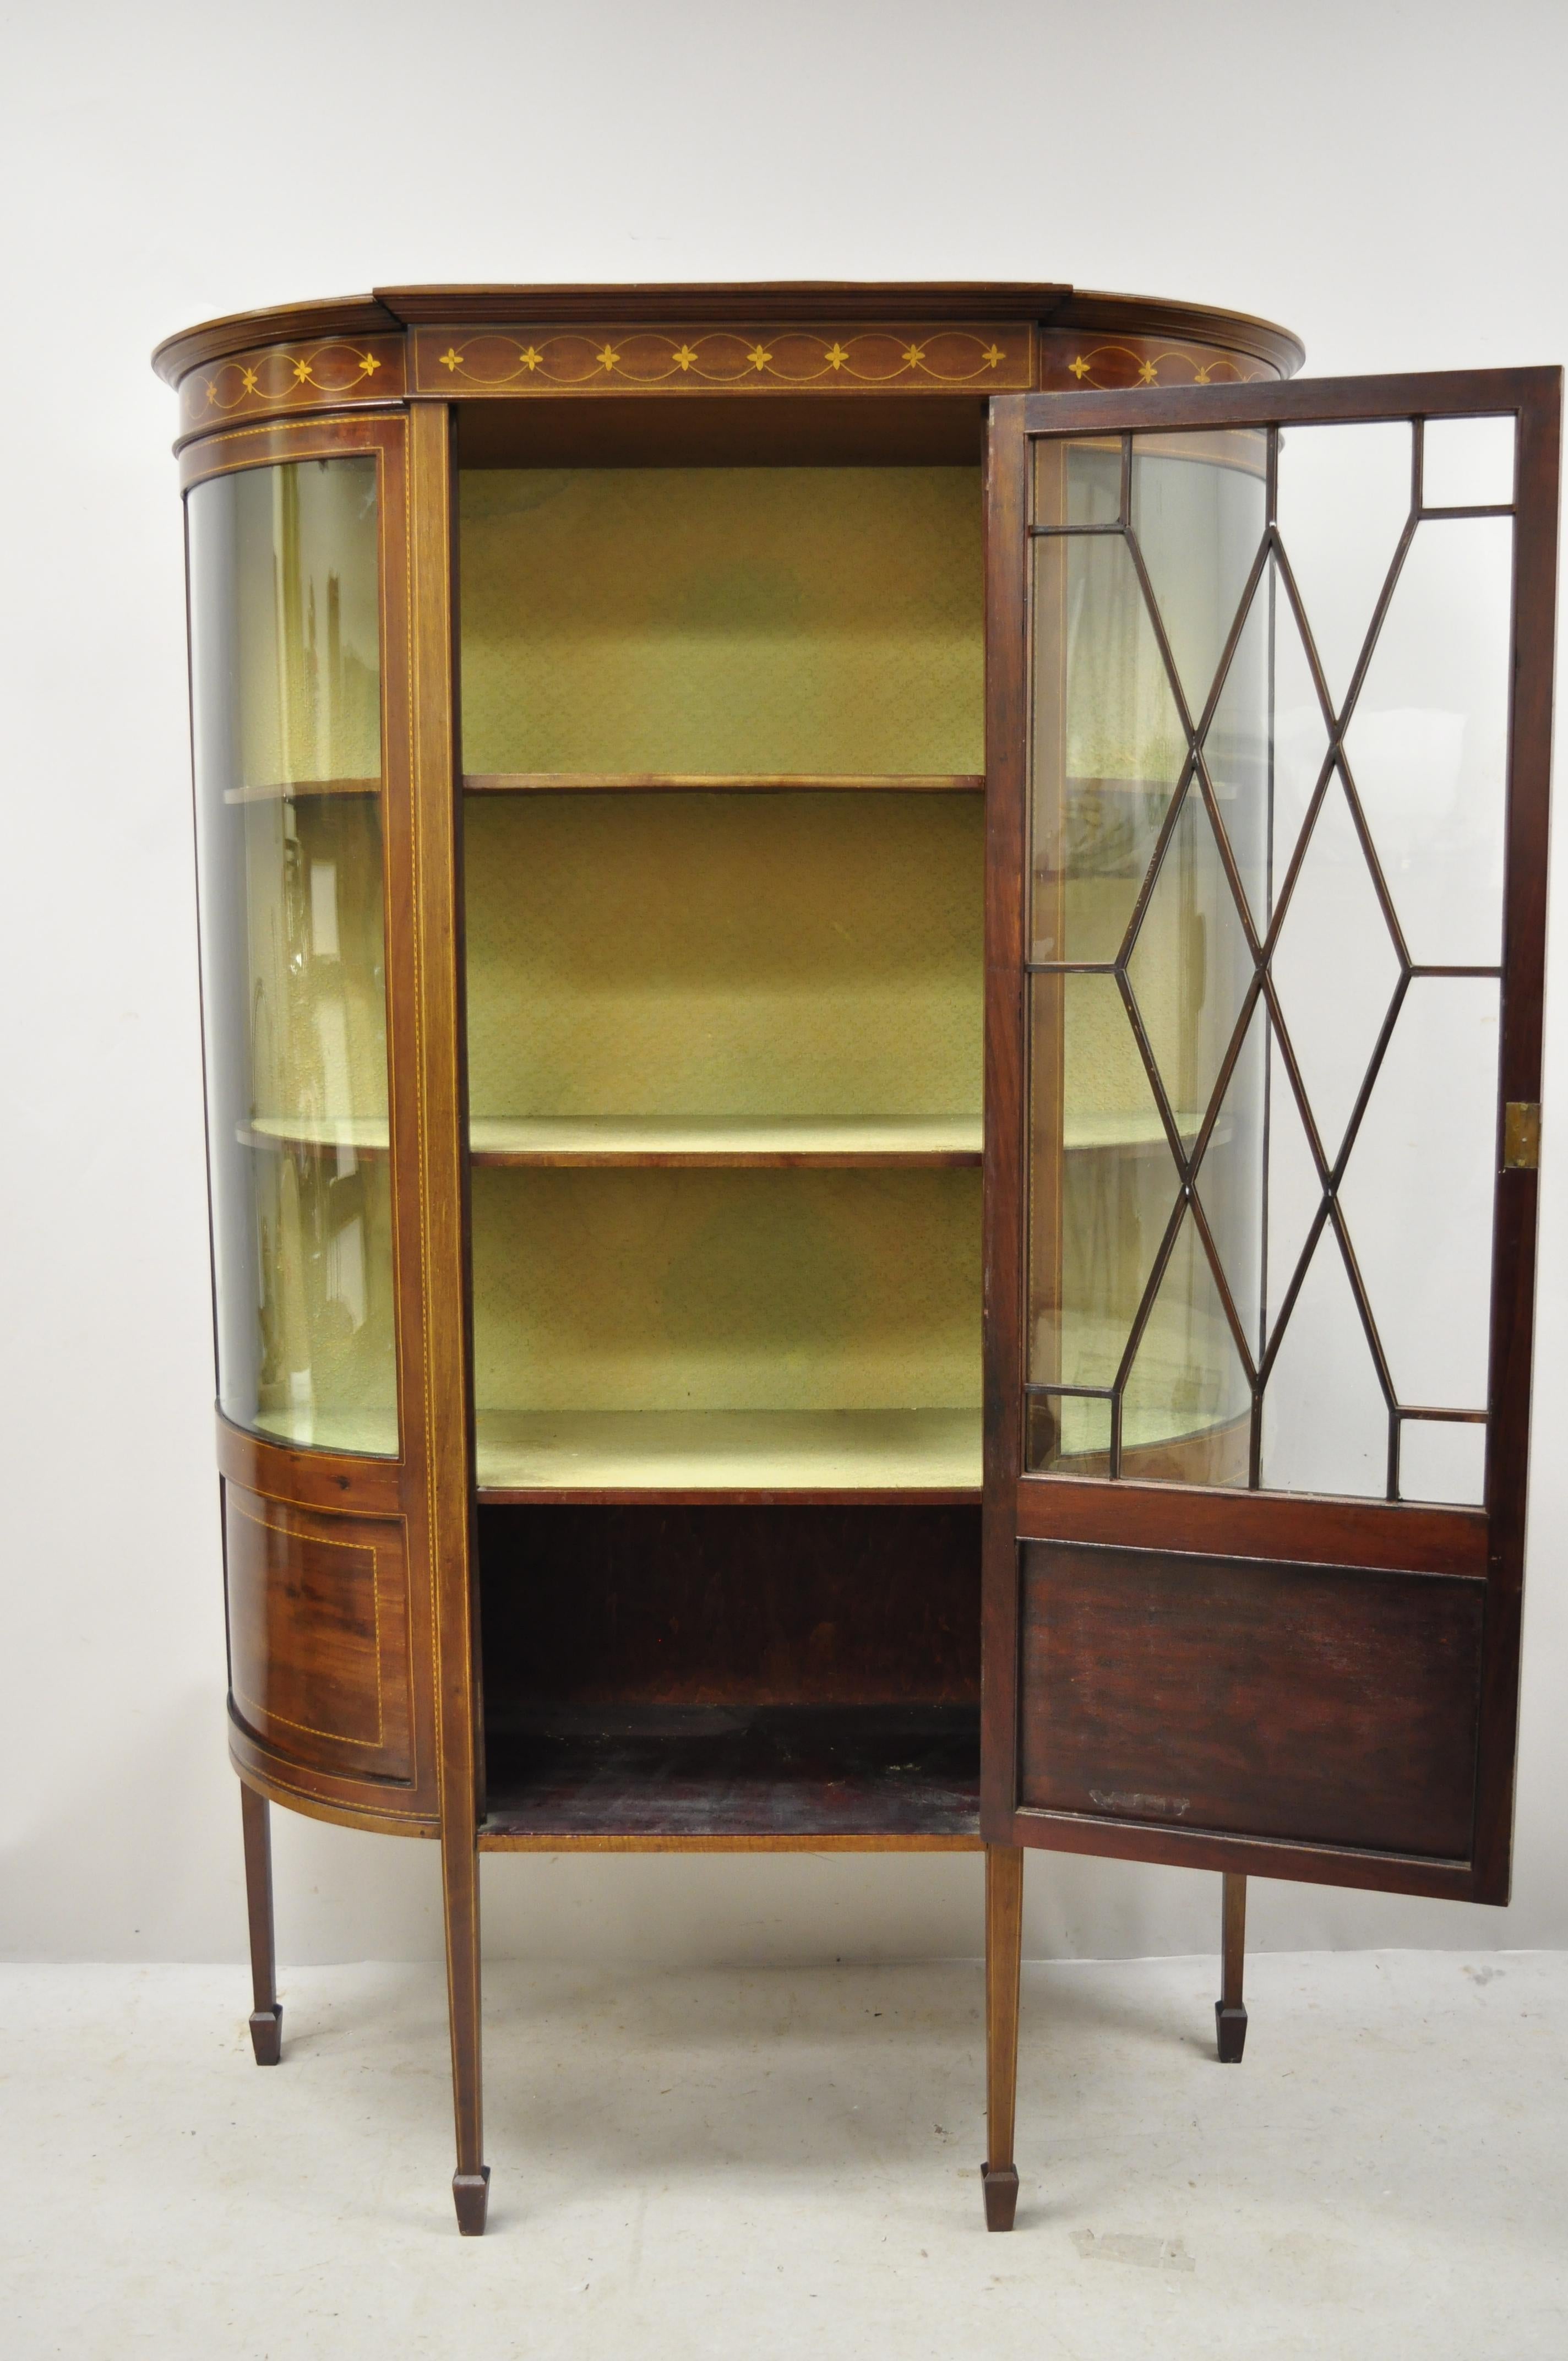 20th Century English Edwardian Satinwood Inlay Bowed Curved Glass China Display Cabinet Curio For Sale